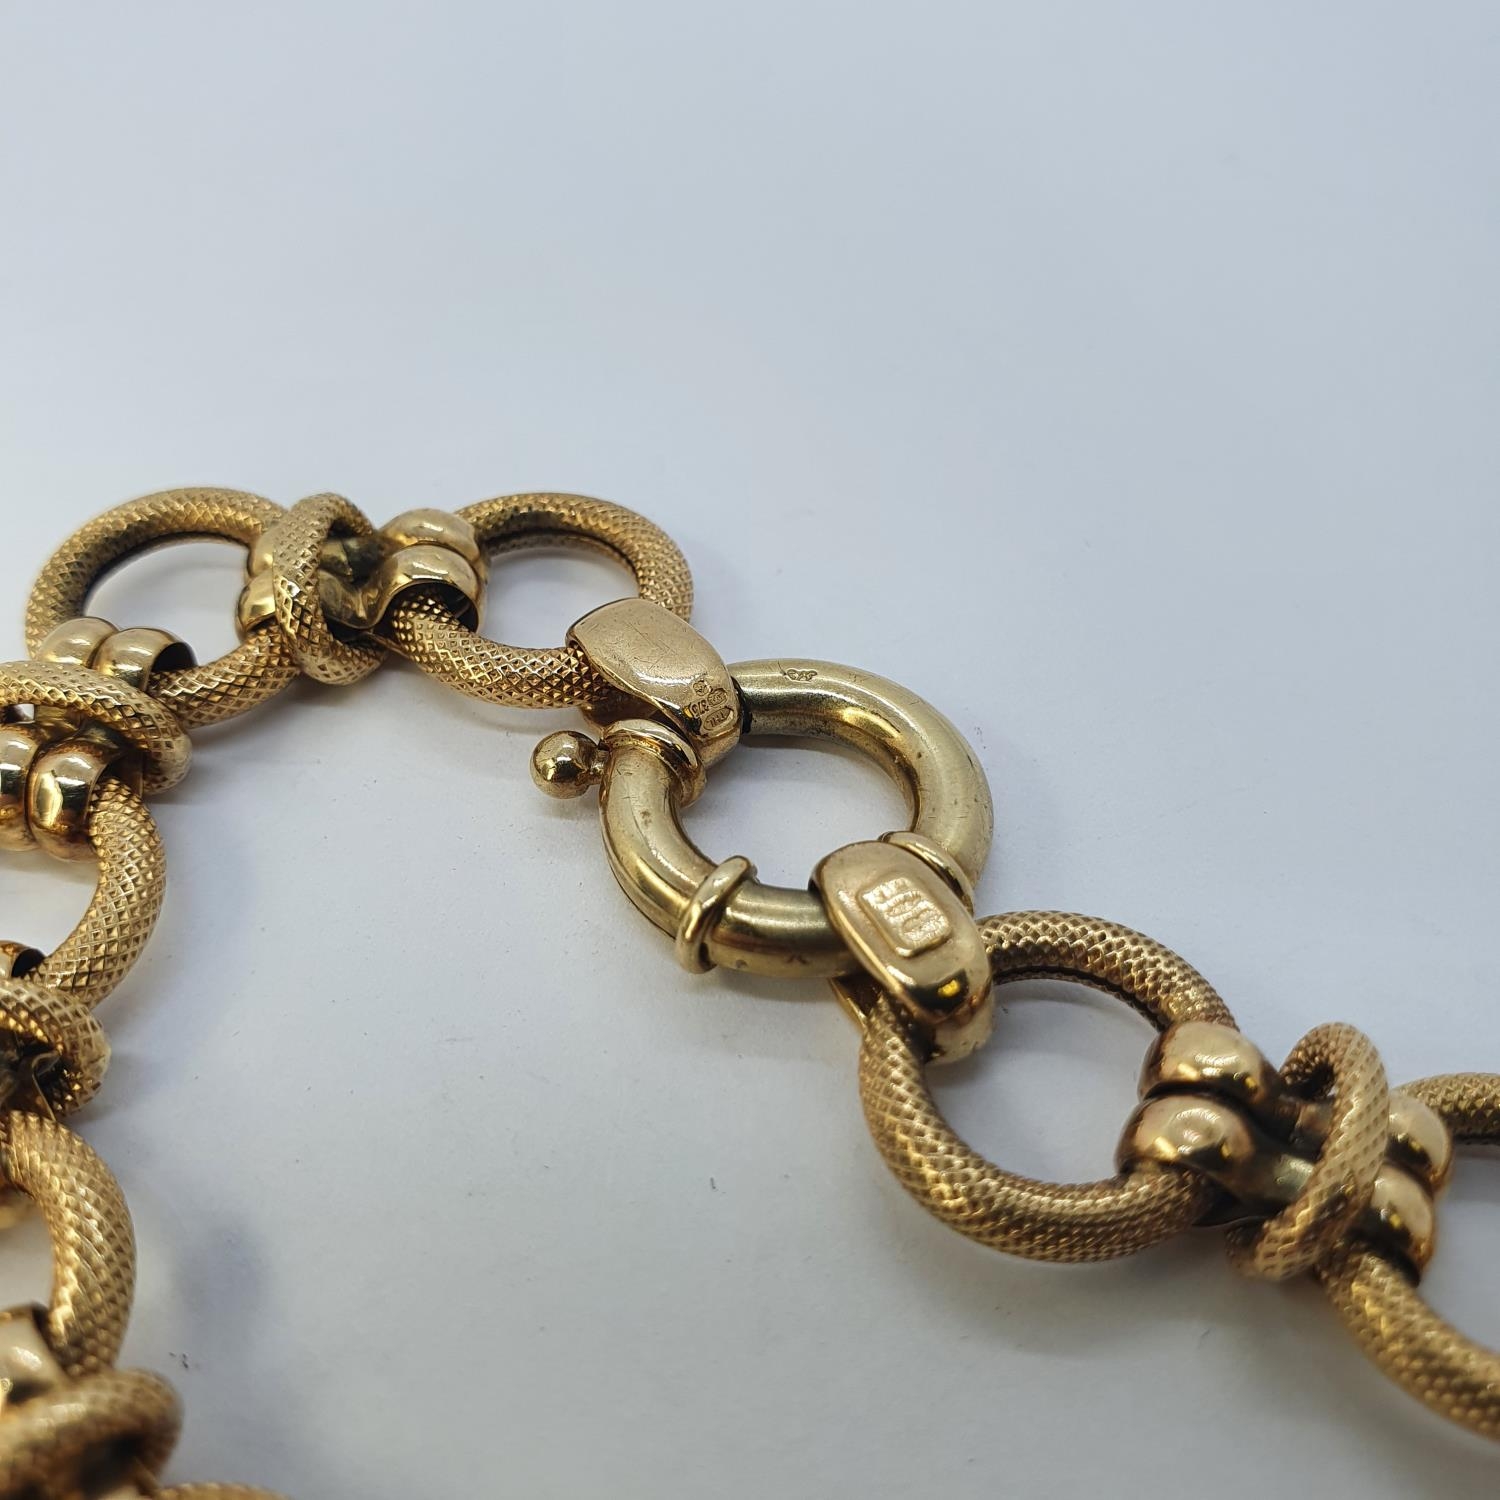 A 9ct gold ring link bracelet, 18.6g 20 cm long Overall condition good no major faults found, - Image 4 of 4